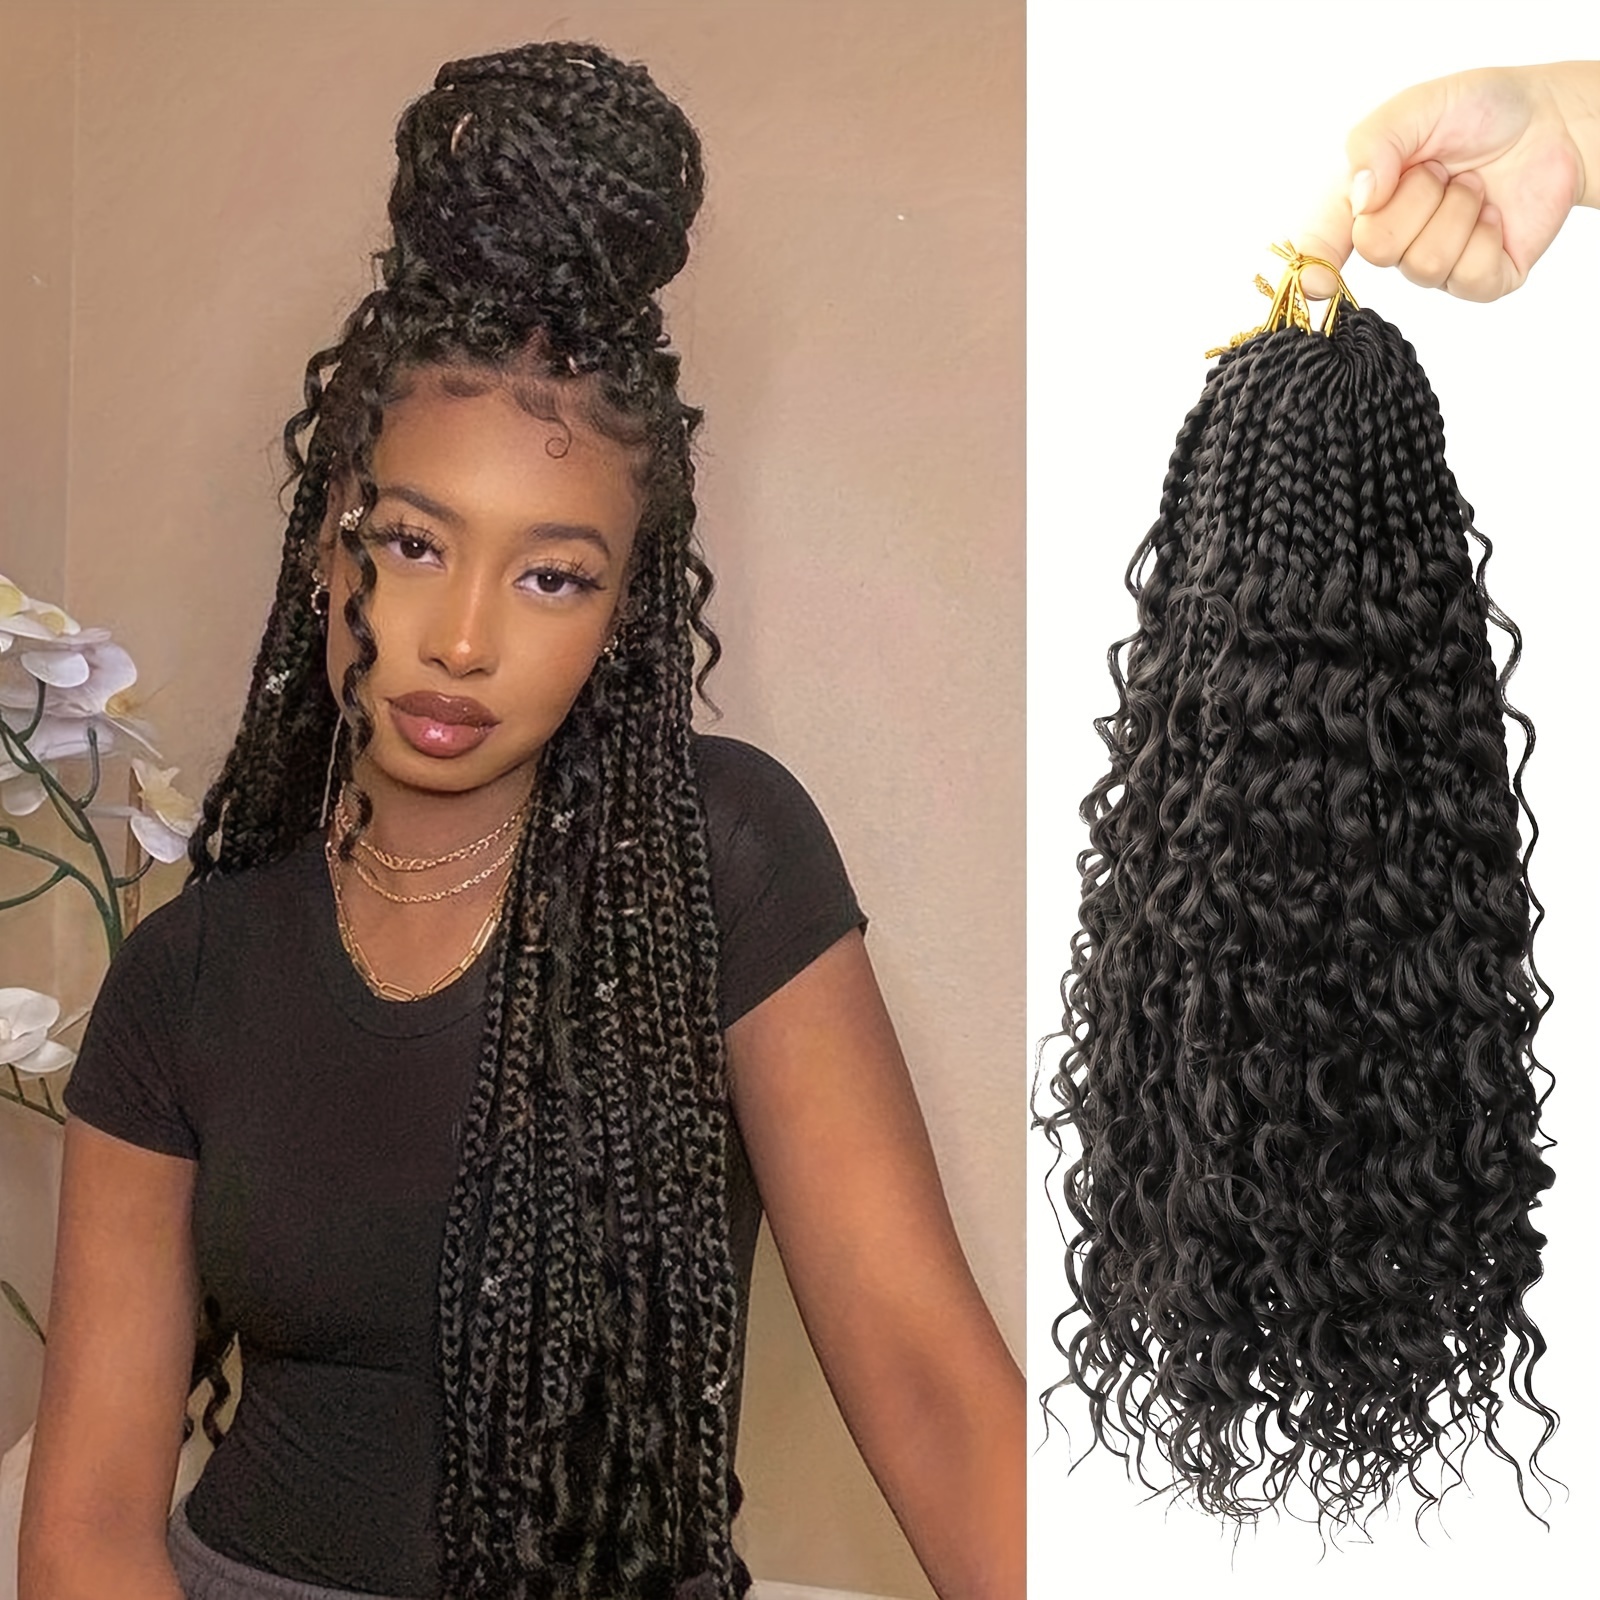 Nia T27 Goddess Crochet Ombre Box Braids with Curly Ends Hair